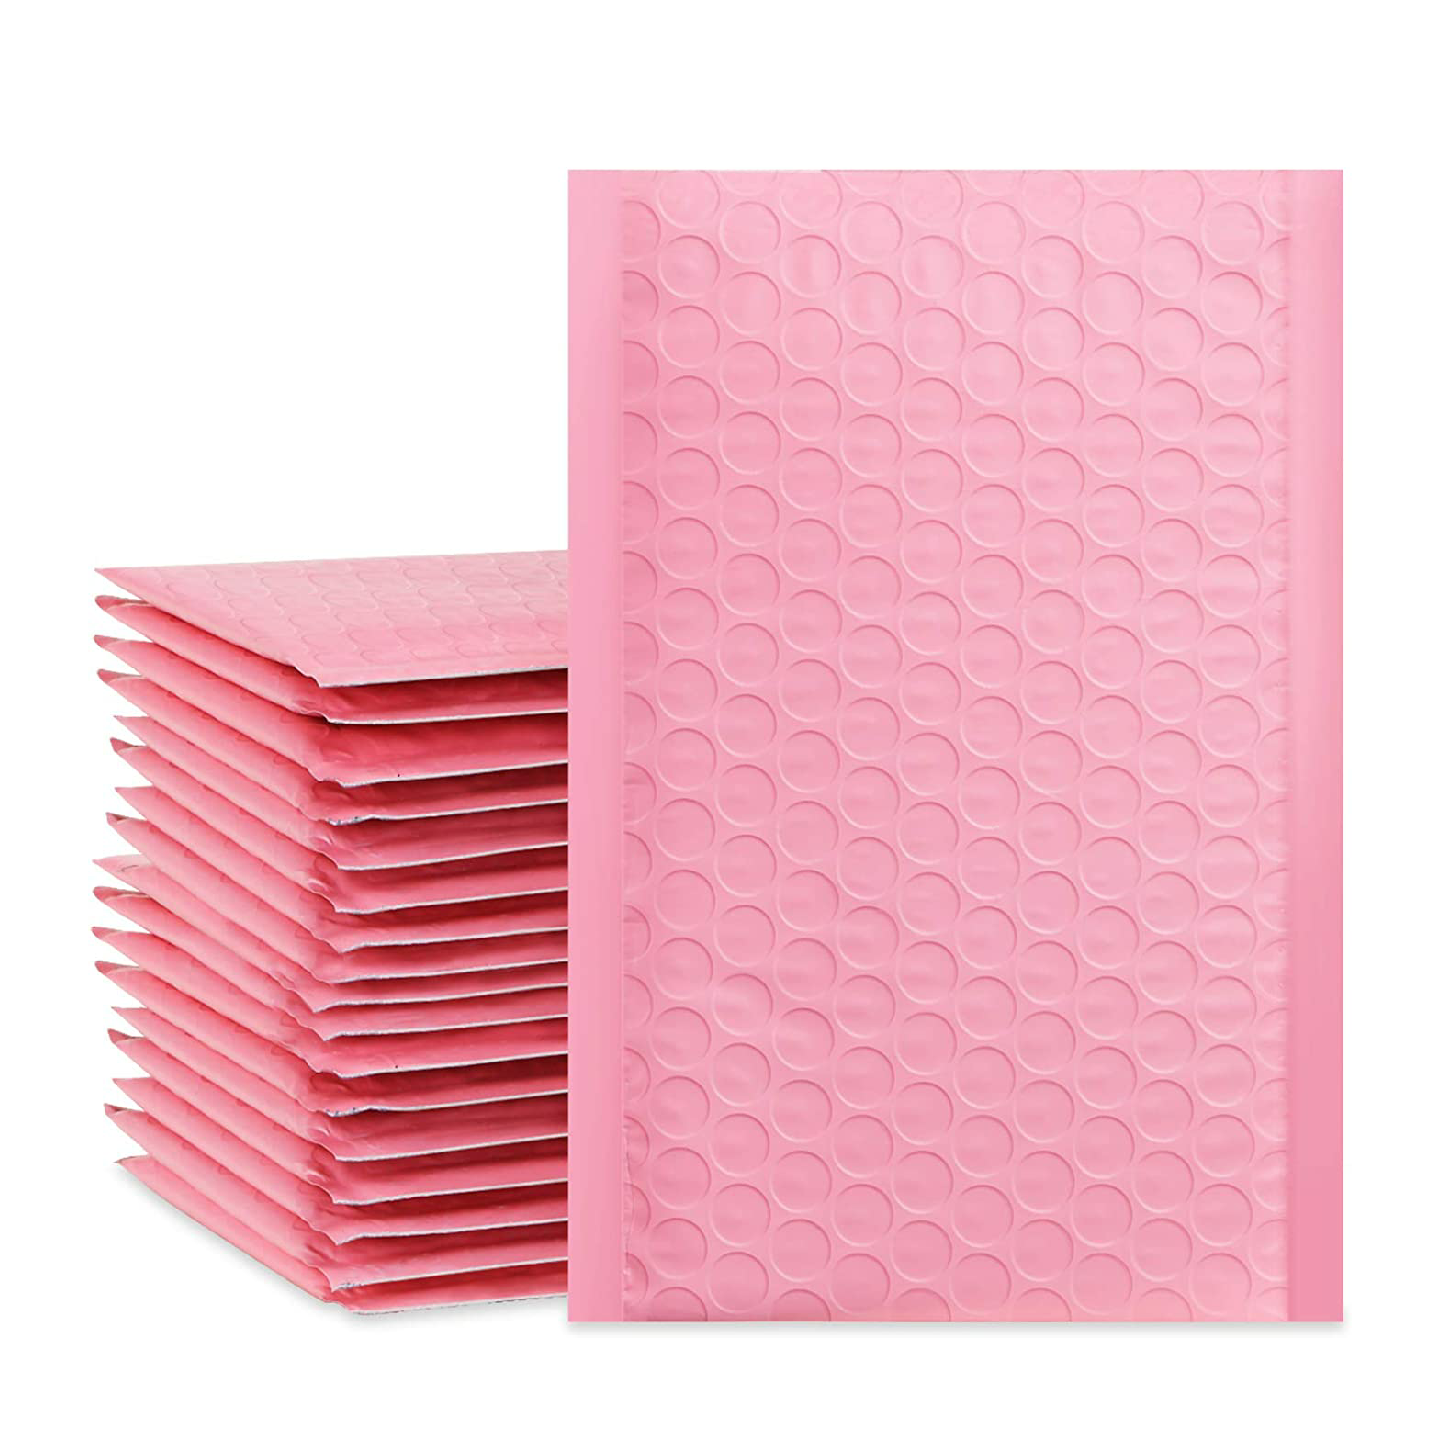 4×8 Bubble Mailers (Light Pink)